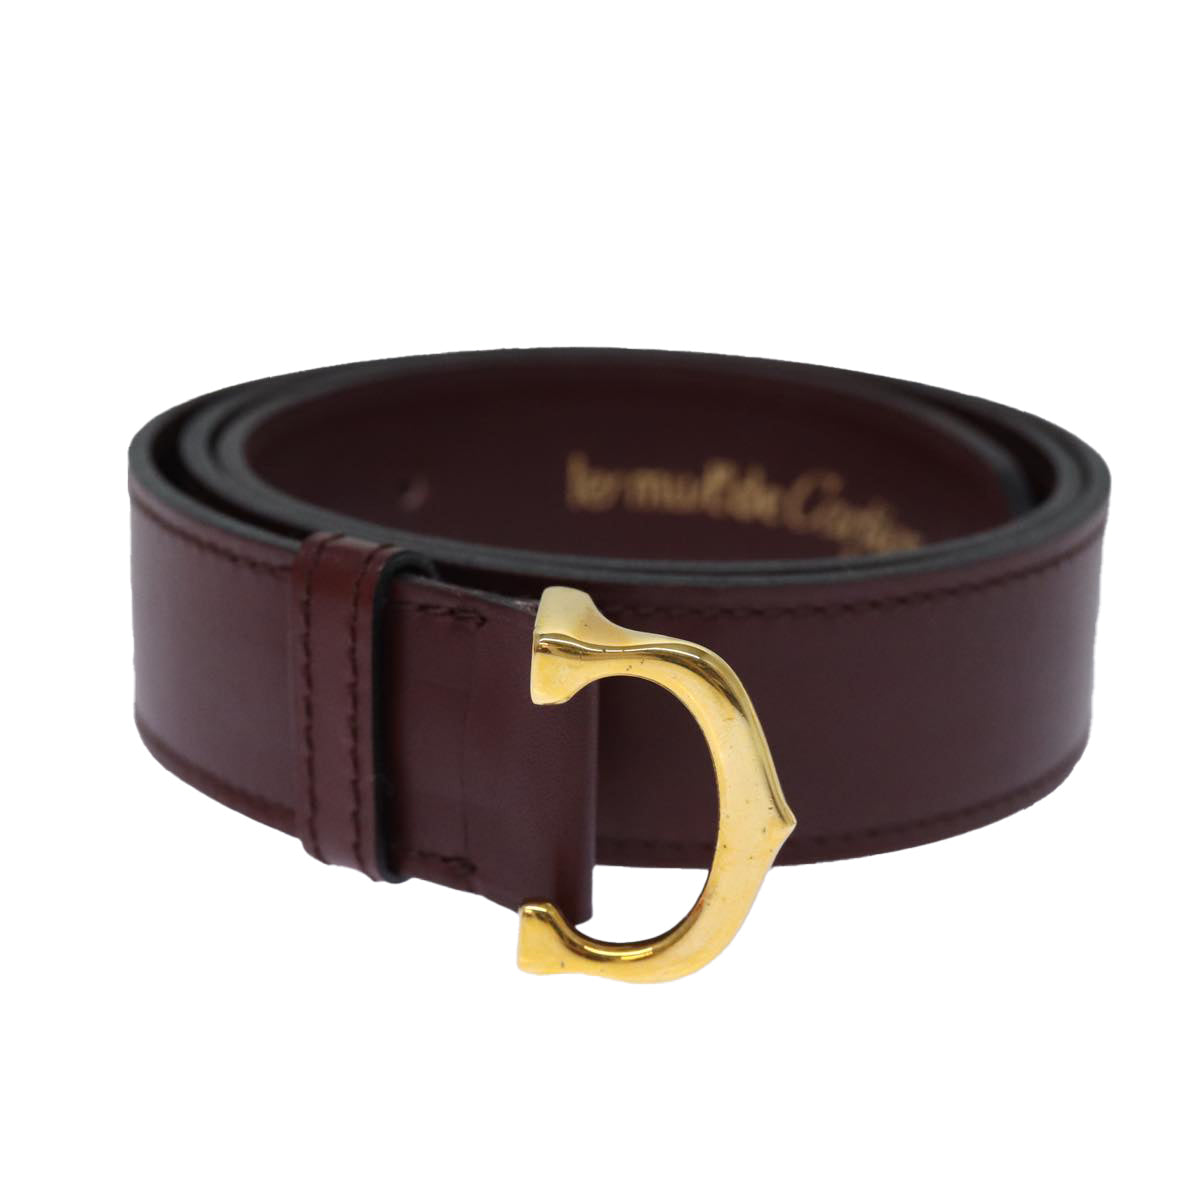 CARTIER Belt Leather 32.7"" Red Auth am6241 - 0